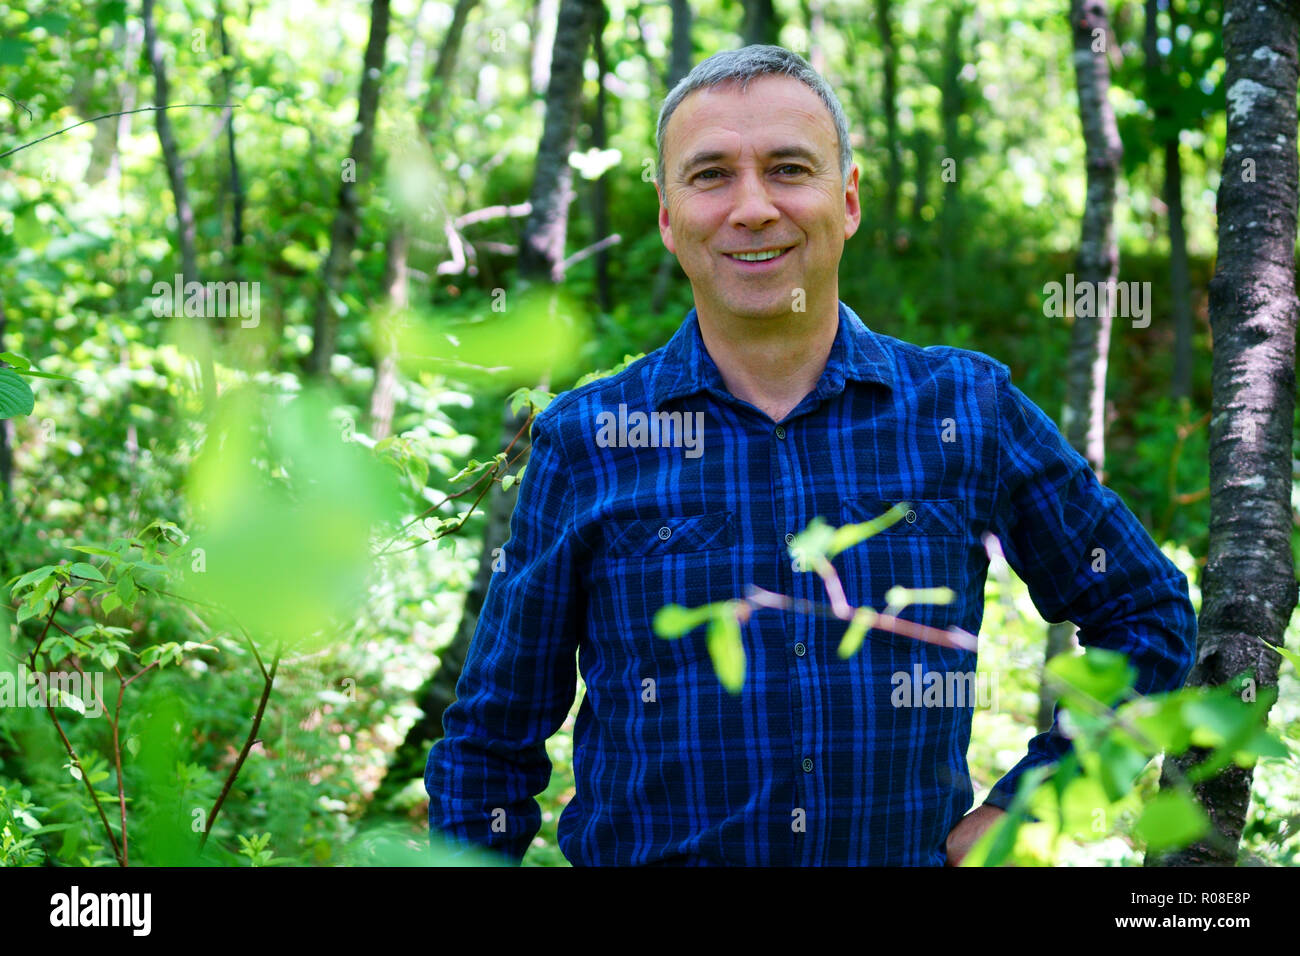 A caucasian smiling man is looking into the camera for a portrait while hiking in the forest wearing a blue check shirt and no hat. Stock Photo